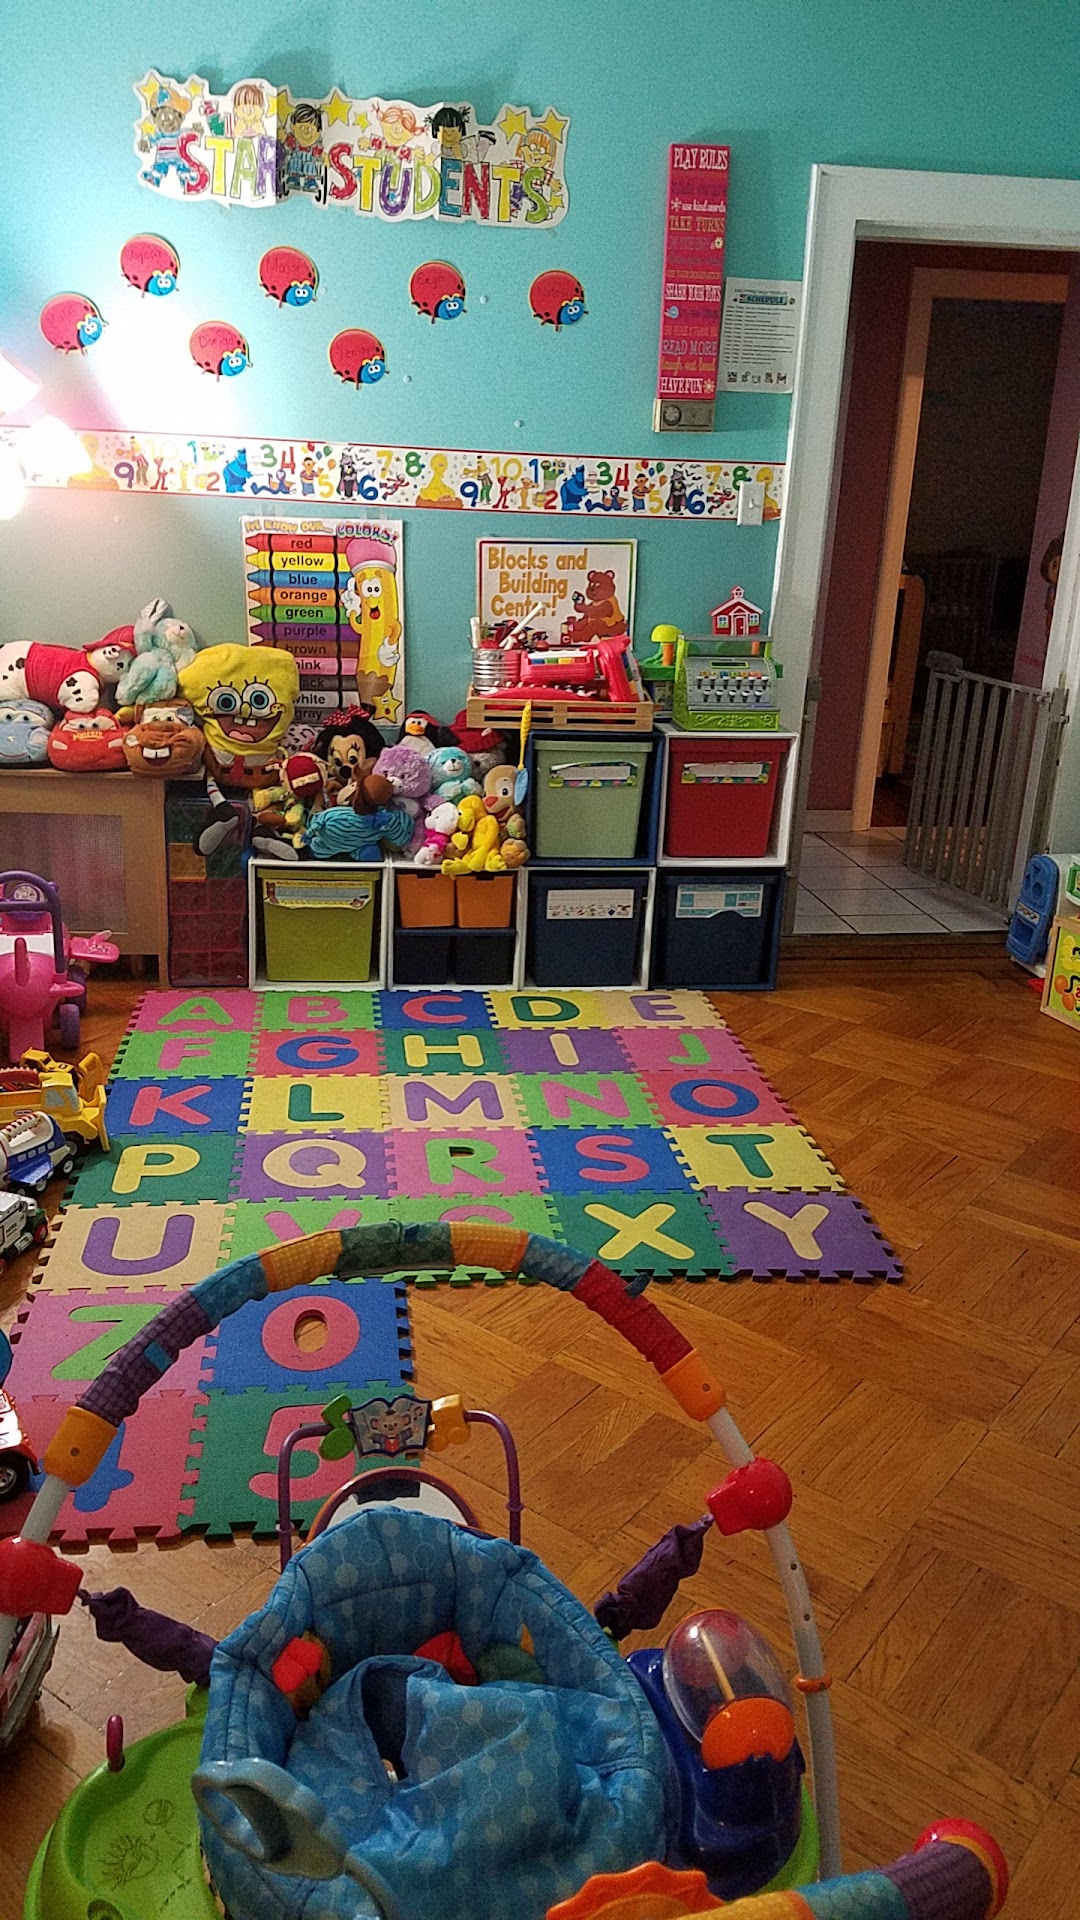 EarlyTymes 24hr Childcare Center